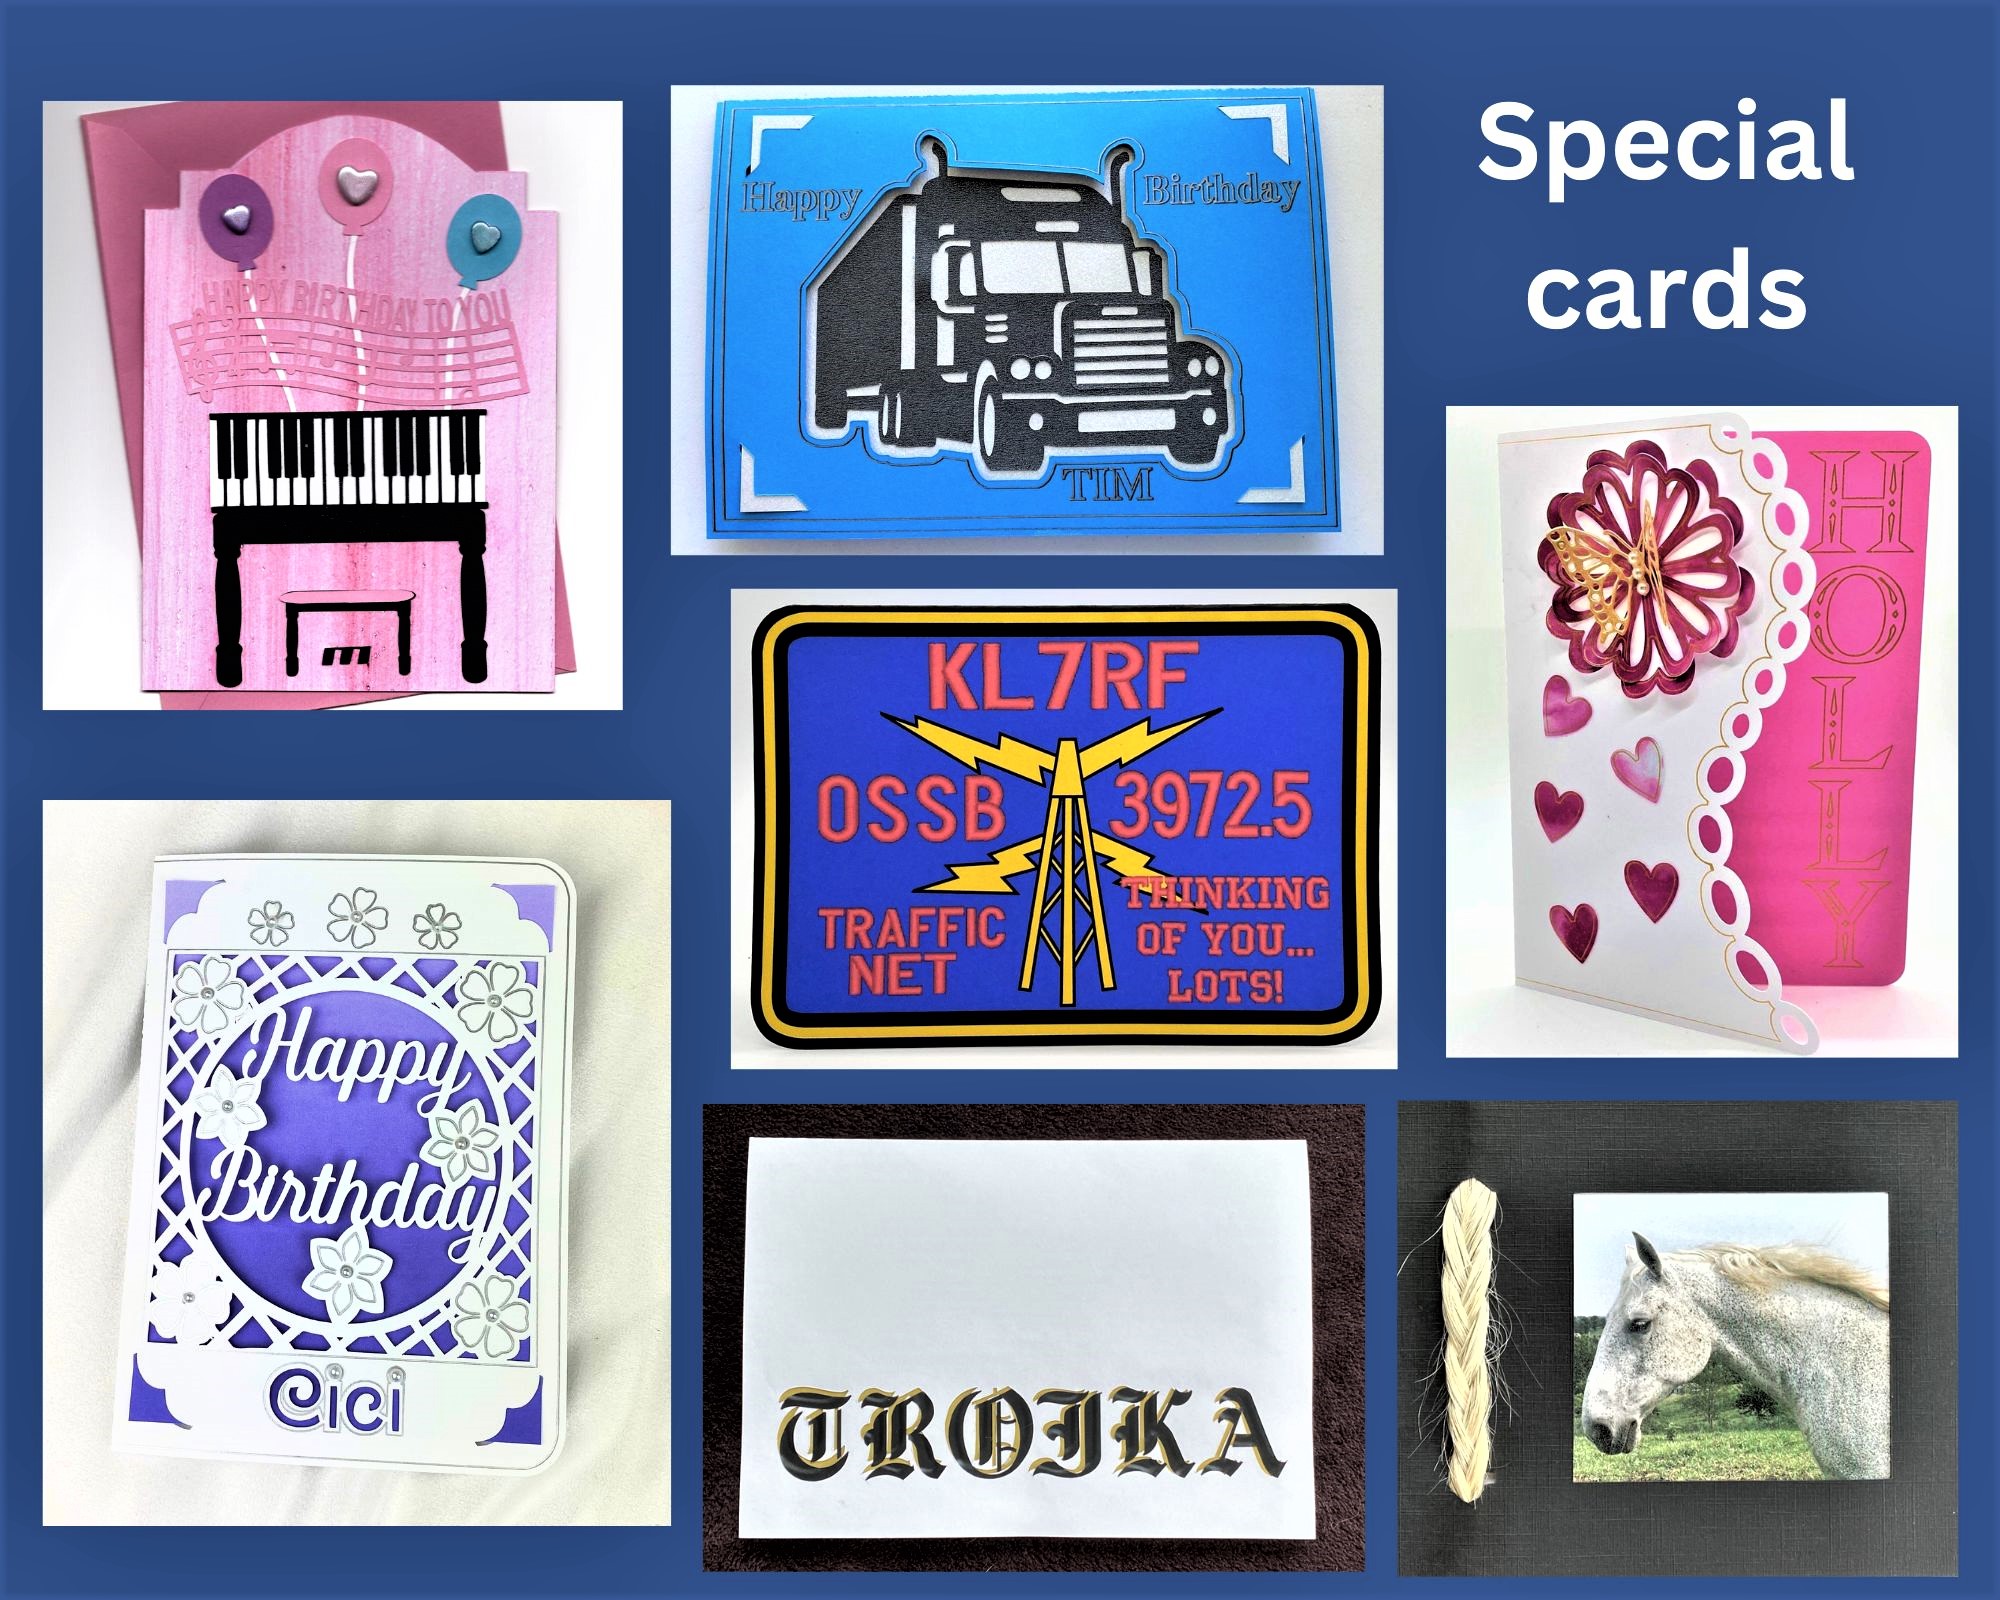 Special Cards